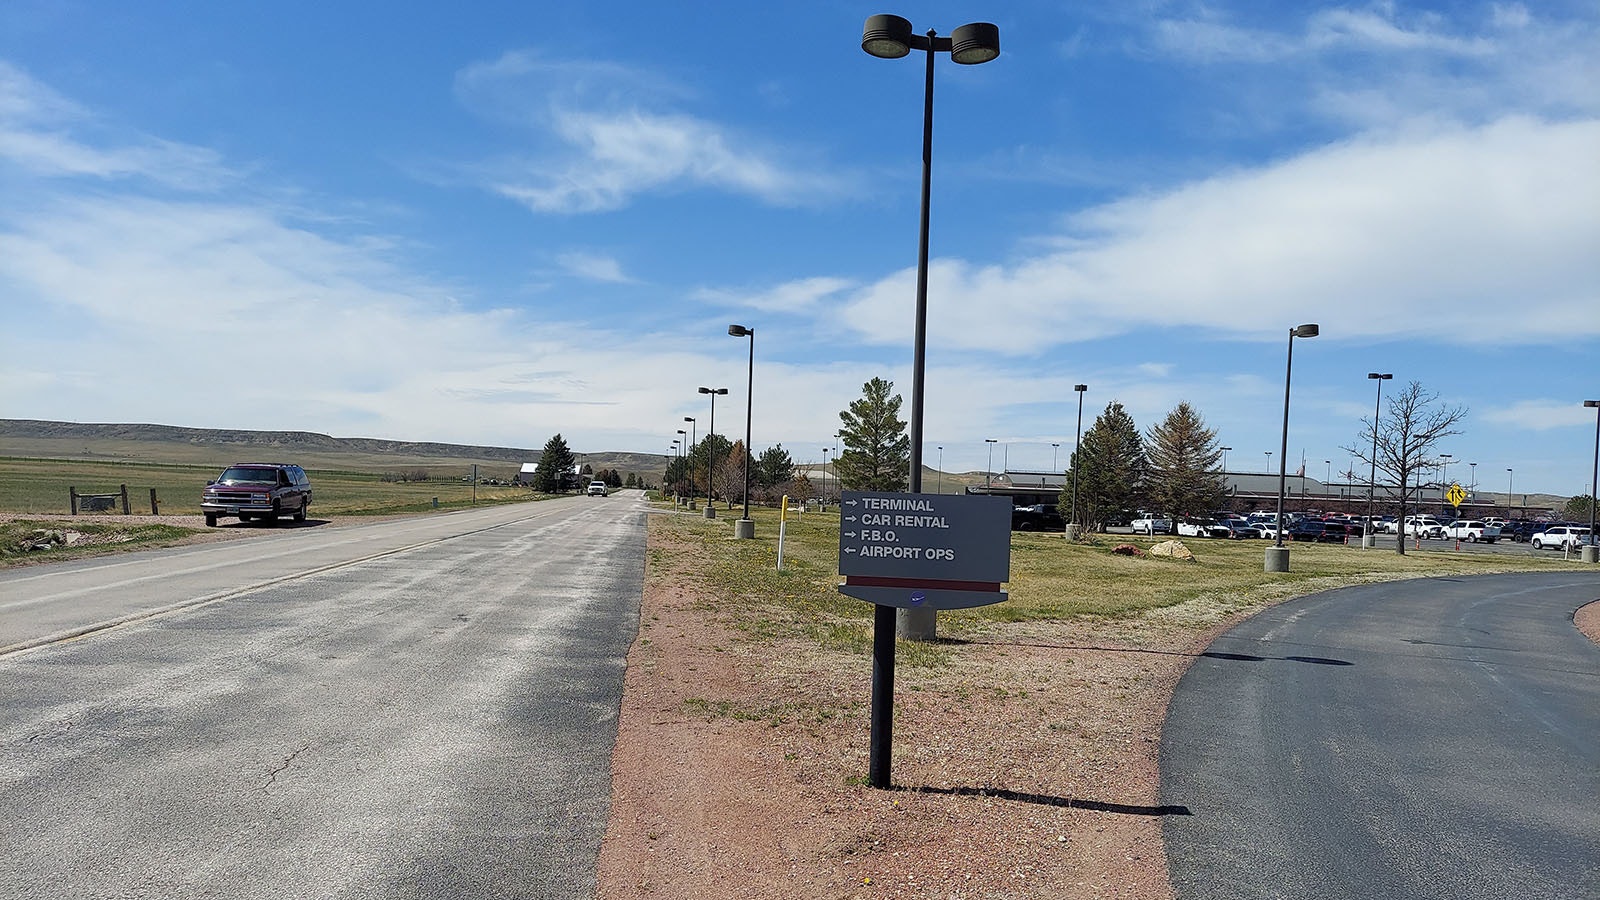 The main entrance to the Northeast Wyoming Regional Airport in Gillette is Airport Road, which then diverges into four other roads all also named Airport Road.